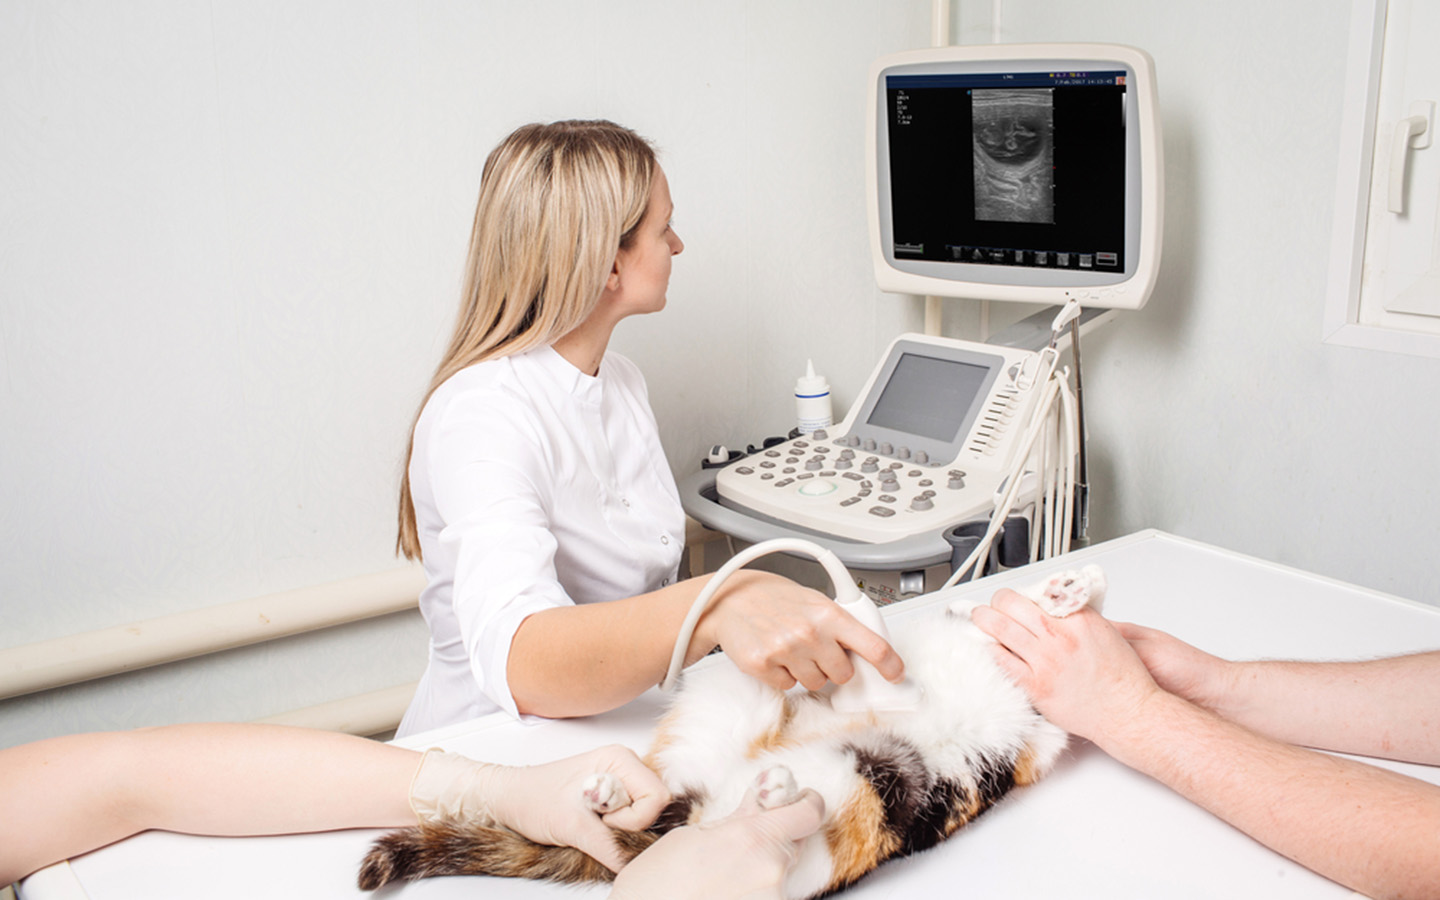 Veterinary Diagnostic Imaging Market: Advanced Imaging Technologies to Drive Growth